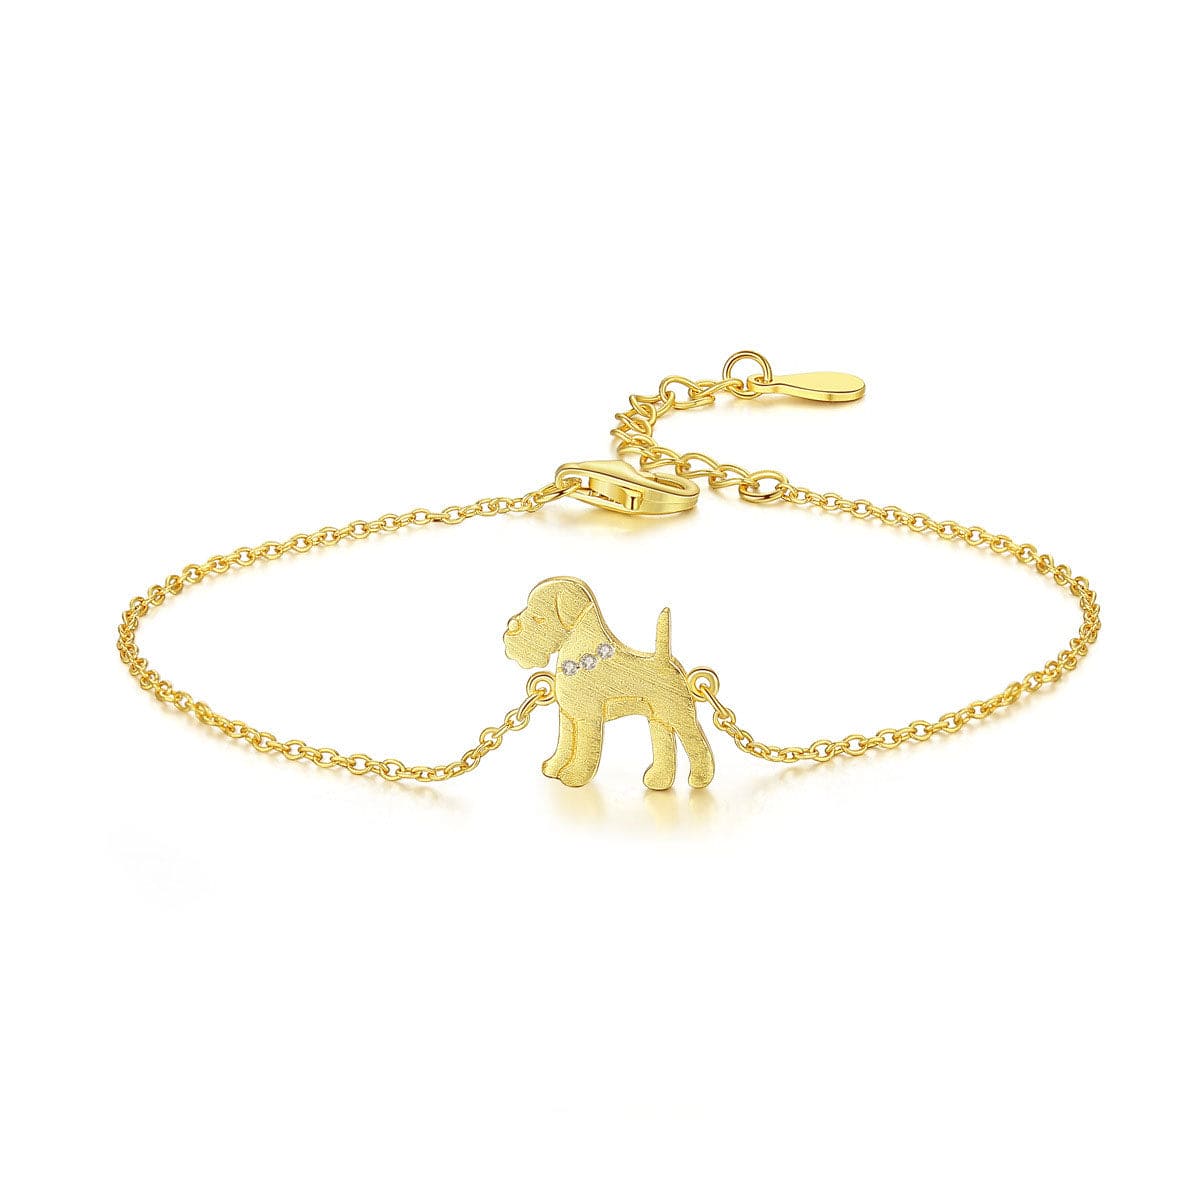 Cute Bulldog With Gemstone Collar 18K Gold Plated Sterling Silver Bracelet